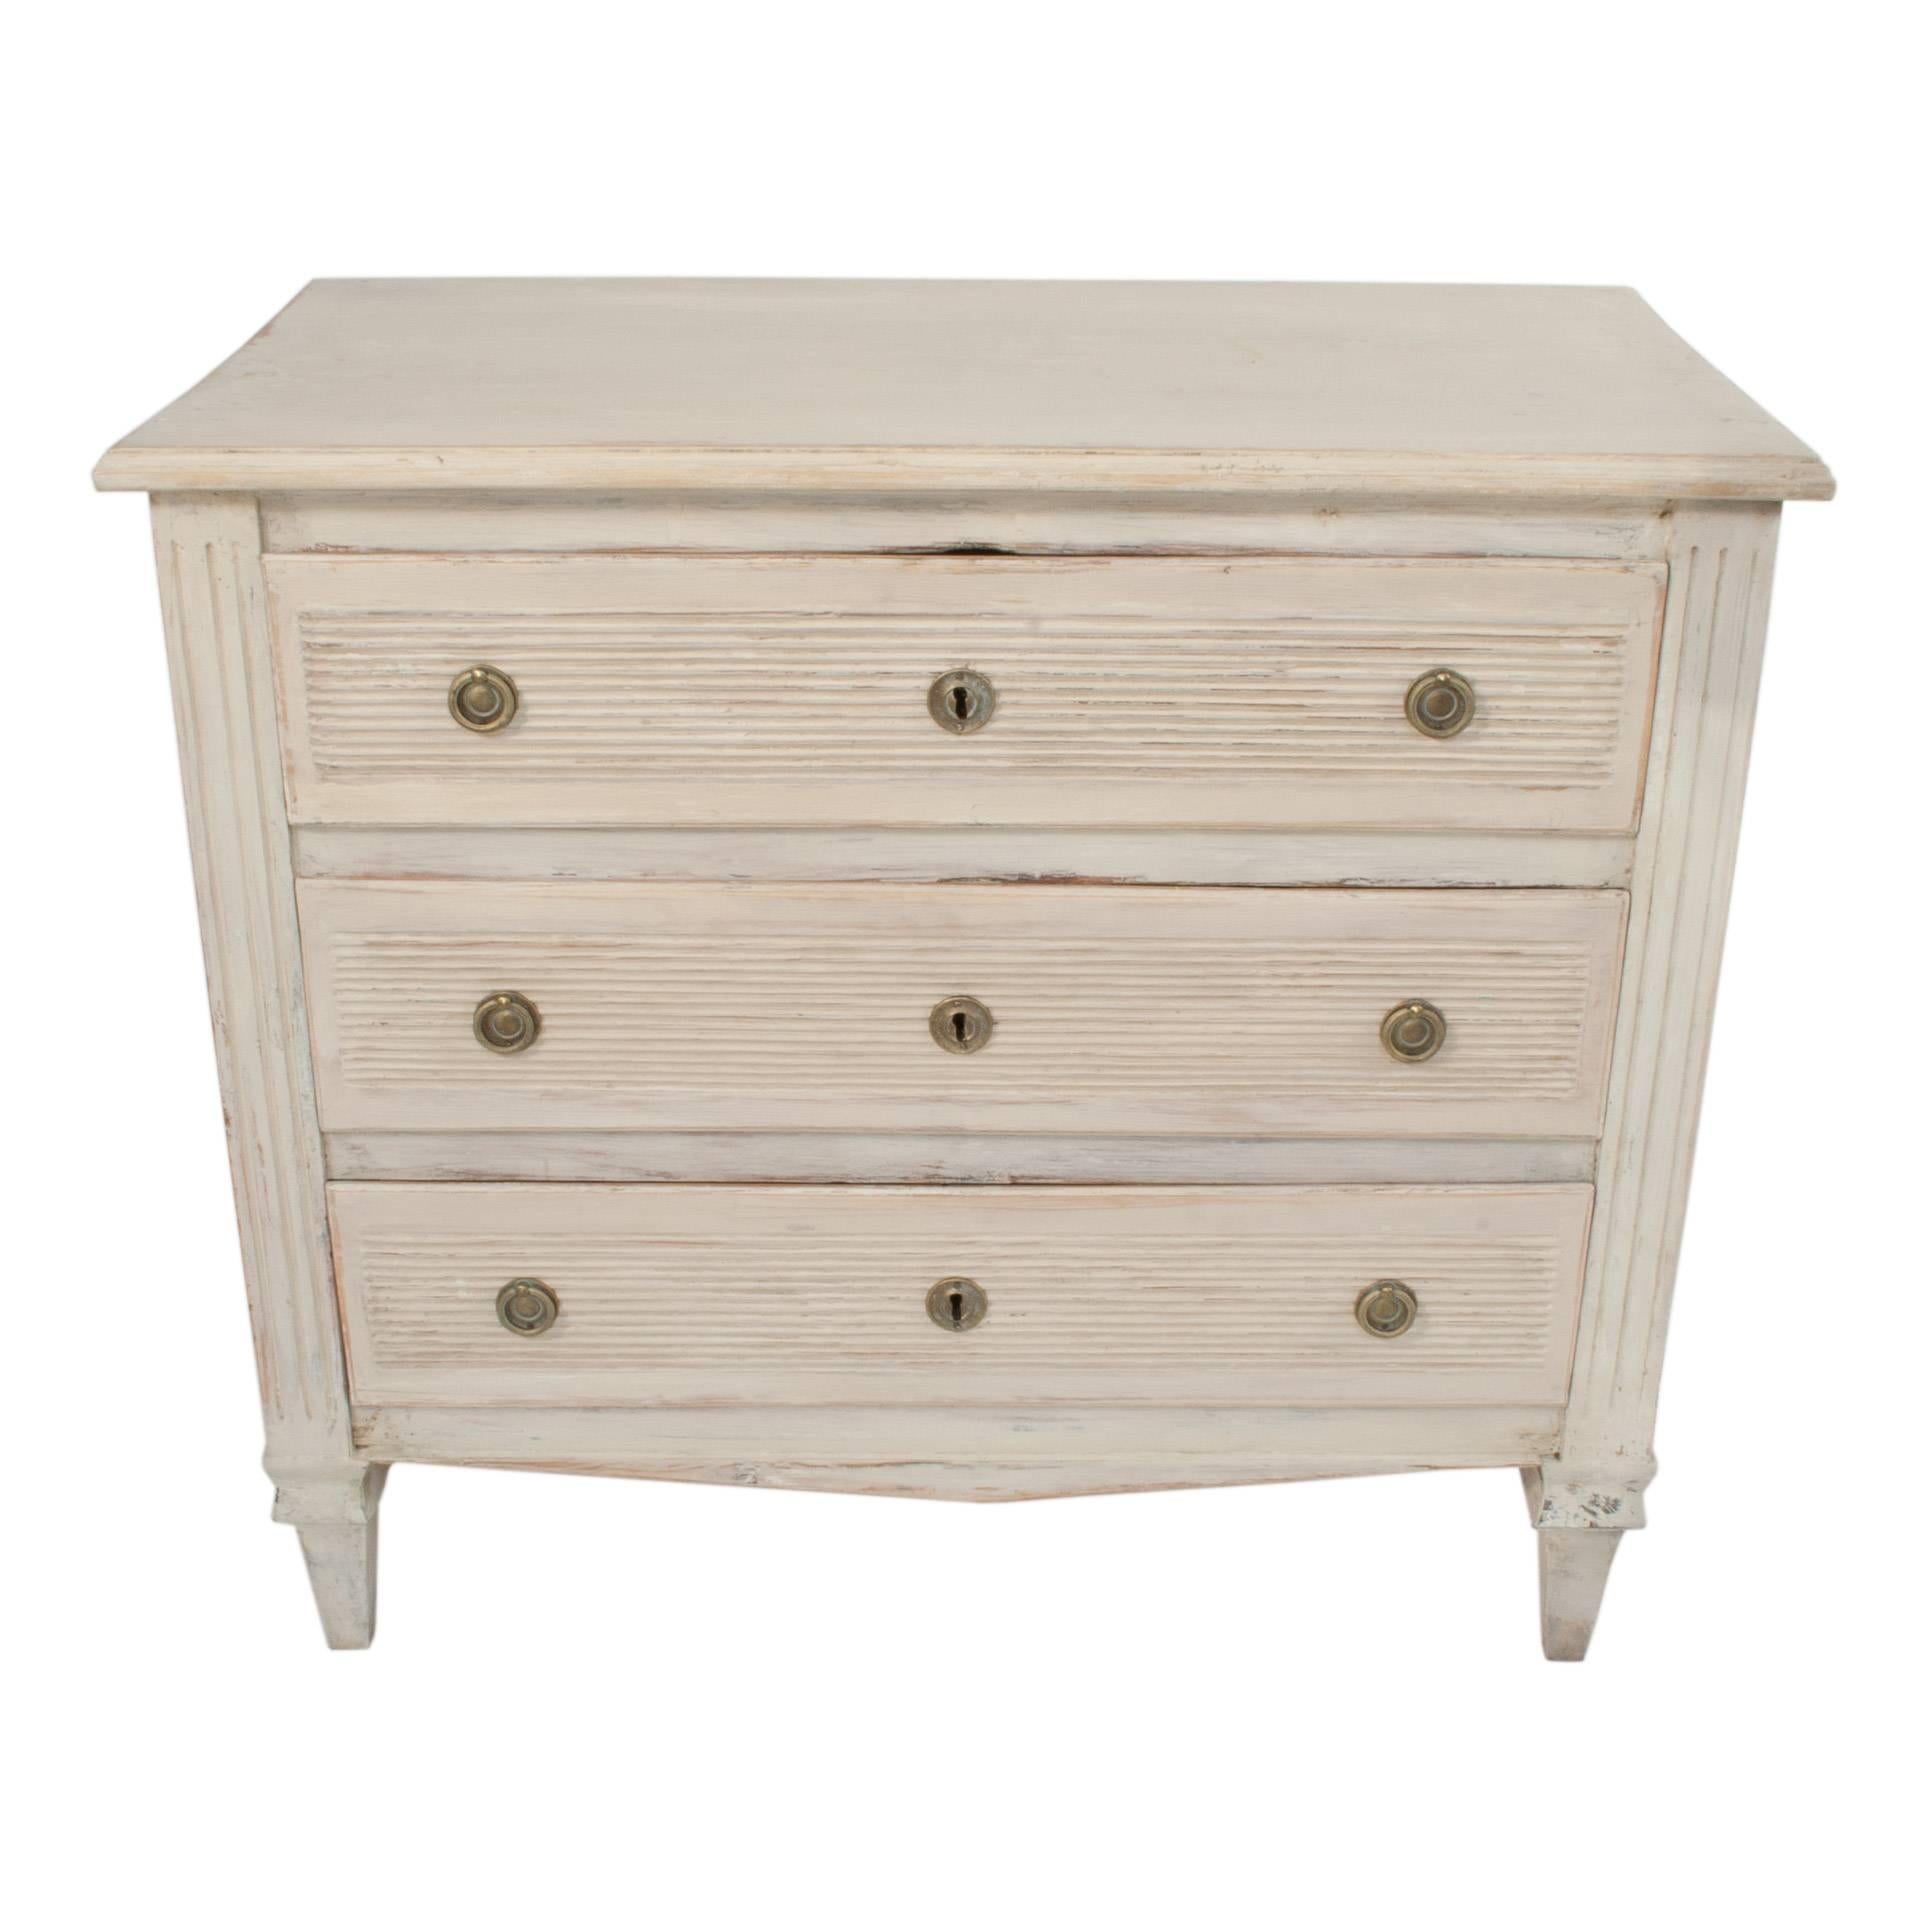 Gustavian chest of drawers. Three drawers Gustavian chest in a worn pale grey patina.